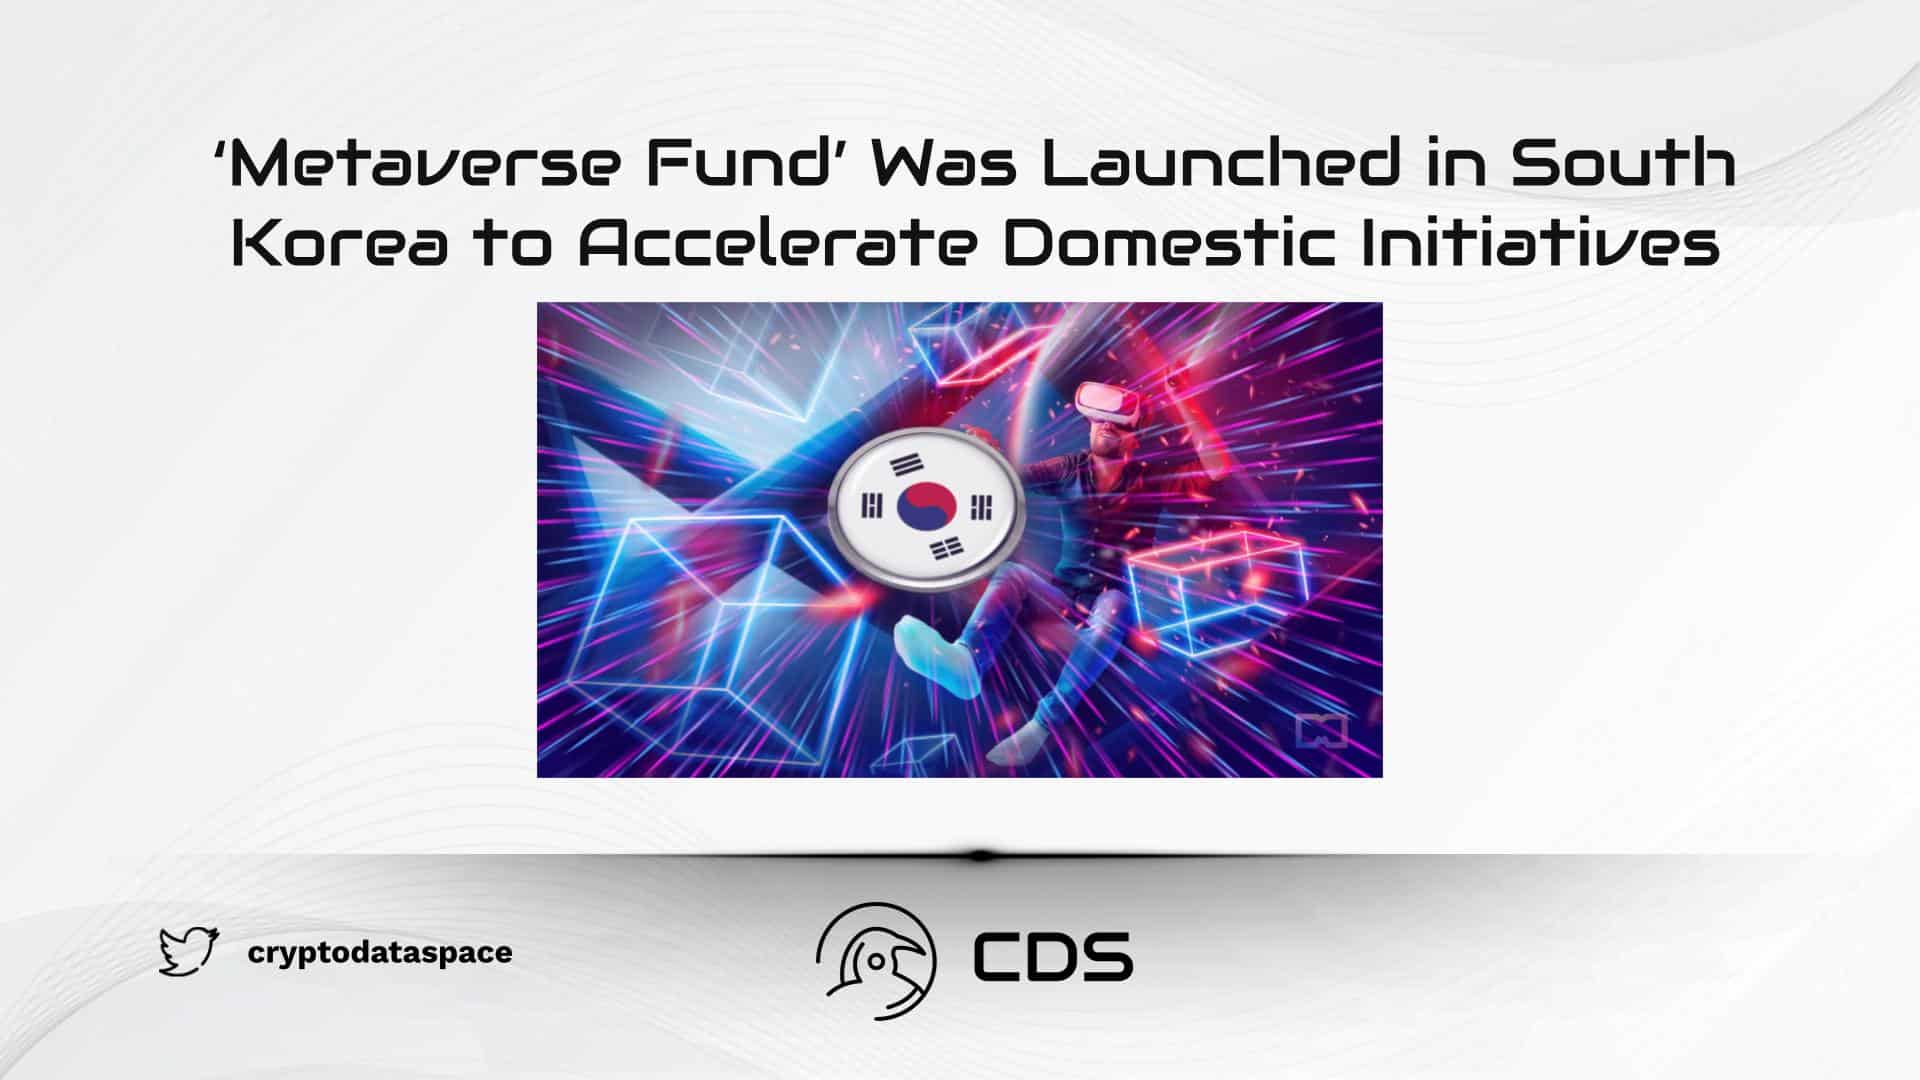 ‘Metaverse Fund’ Was Launched in South Korea to Accelerate Domestic Initiatives